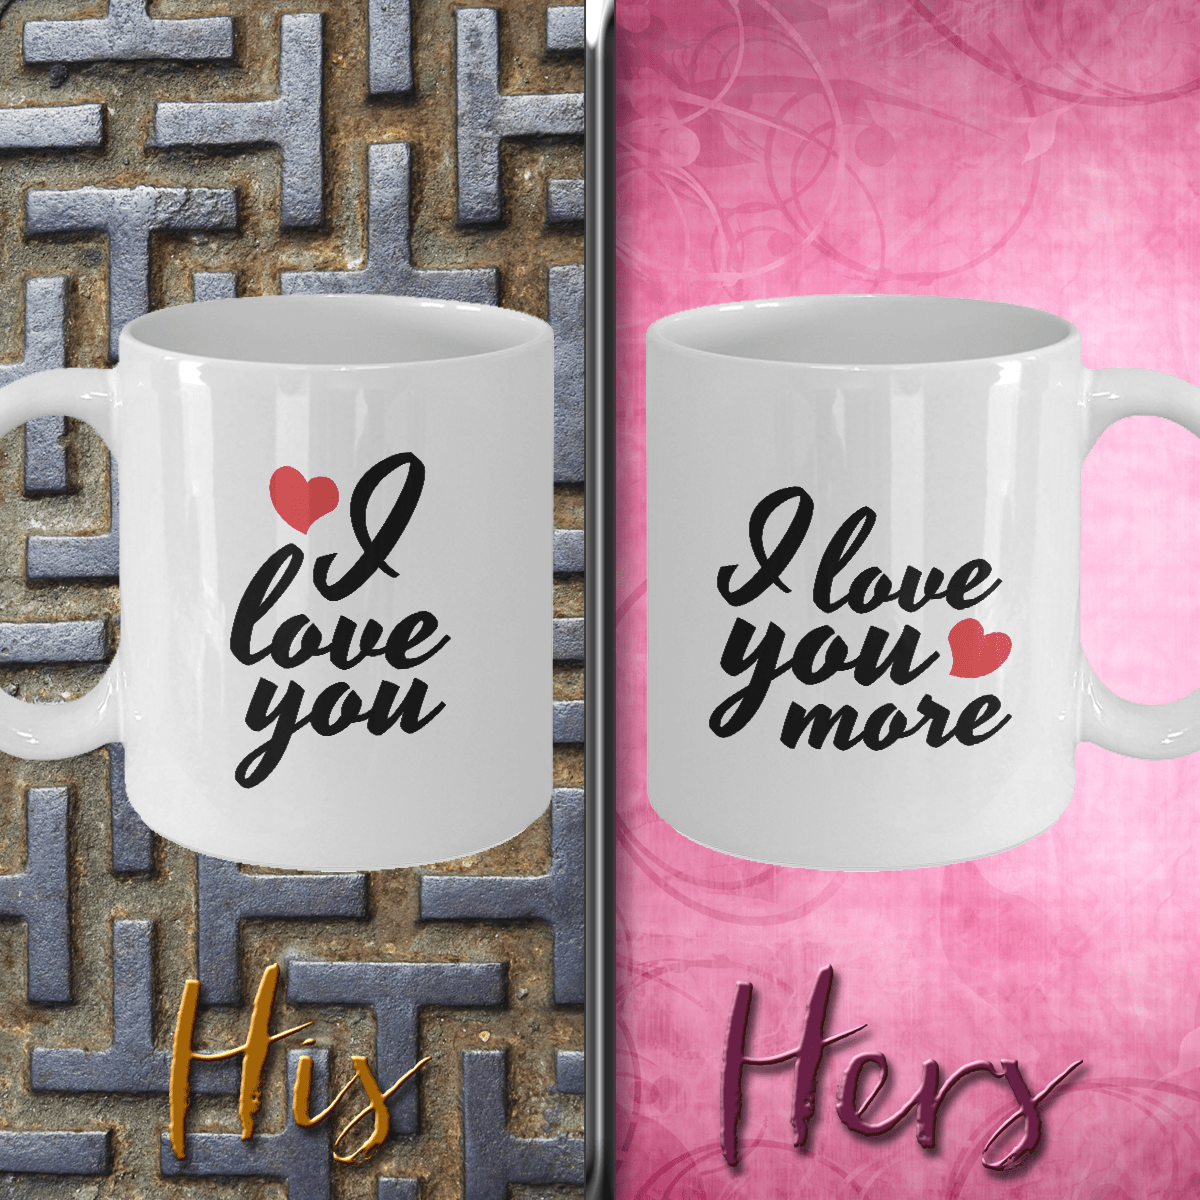 I Love You and I Love You More Couples Mug - Set of 2 His and Hers